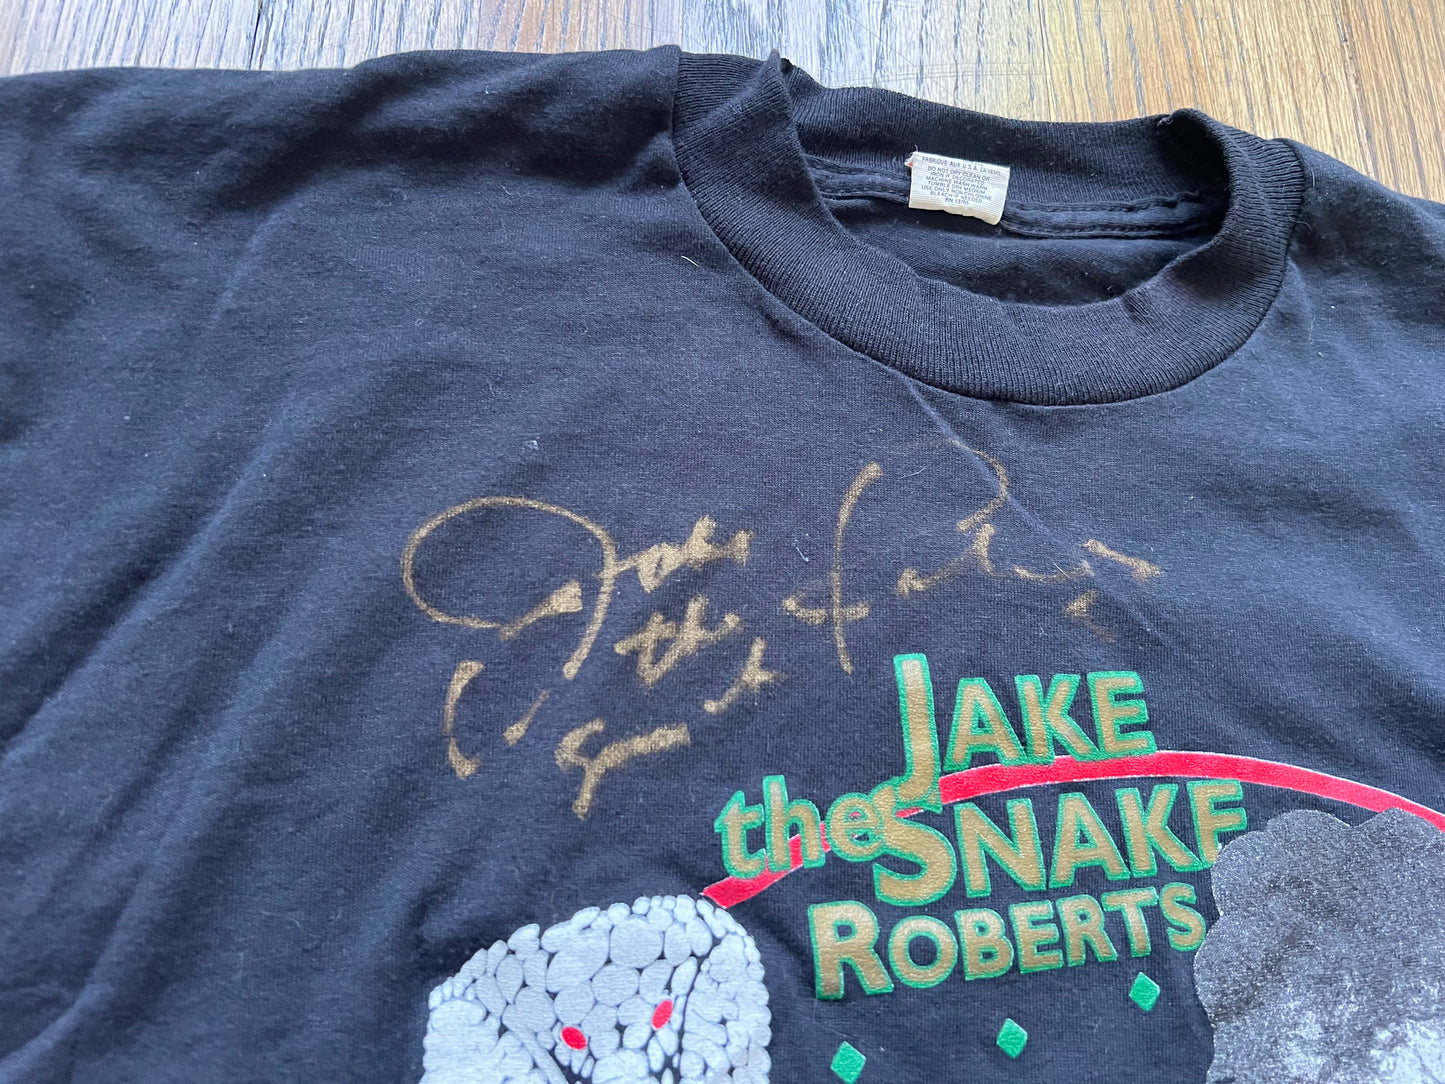 1993 Jake “The Snake” Roberts “Cruel But Fair” tour shirt signed by Jake and includes COA